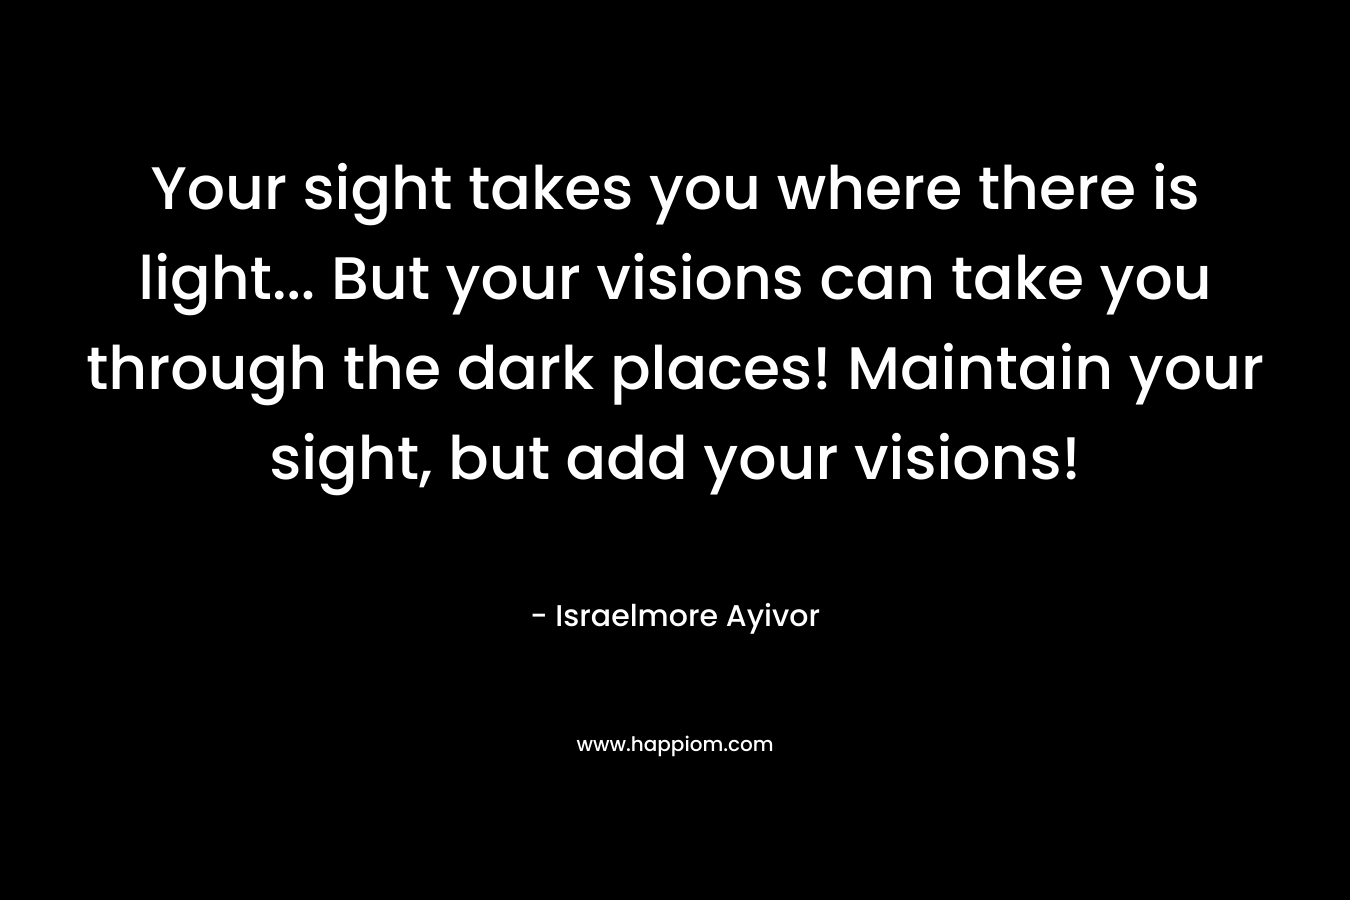 Your sight takes you where there is light... But your visions can take you through the dark places! Maintain your sight, but add your visions!